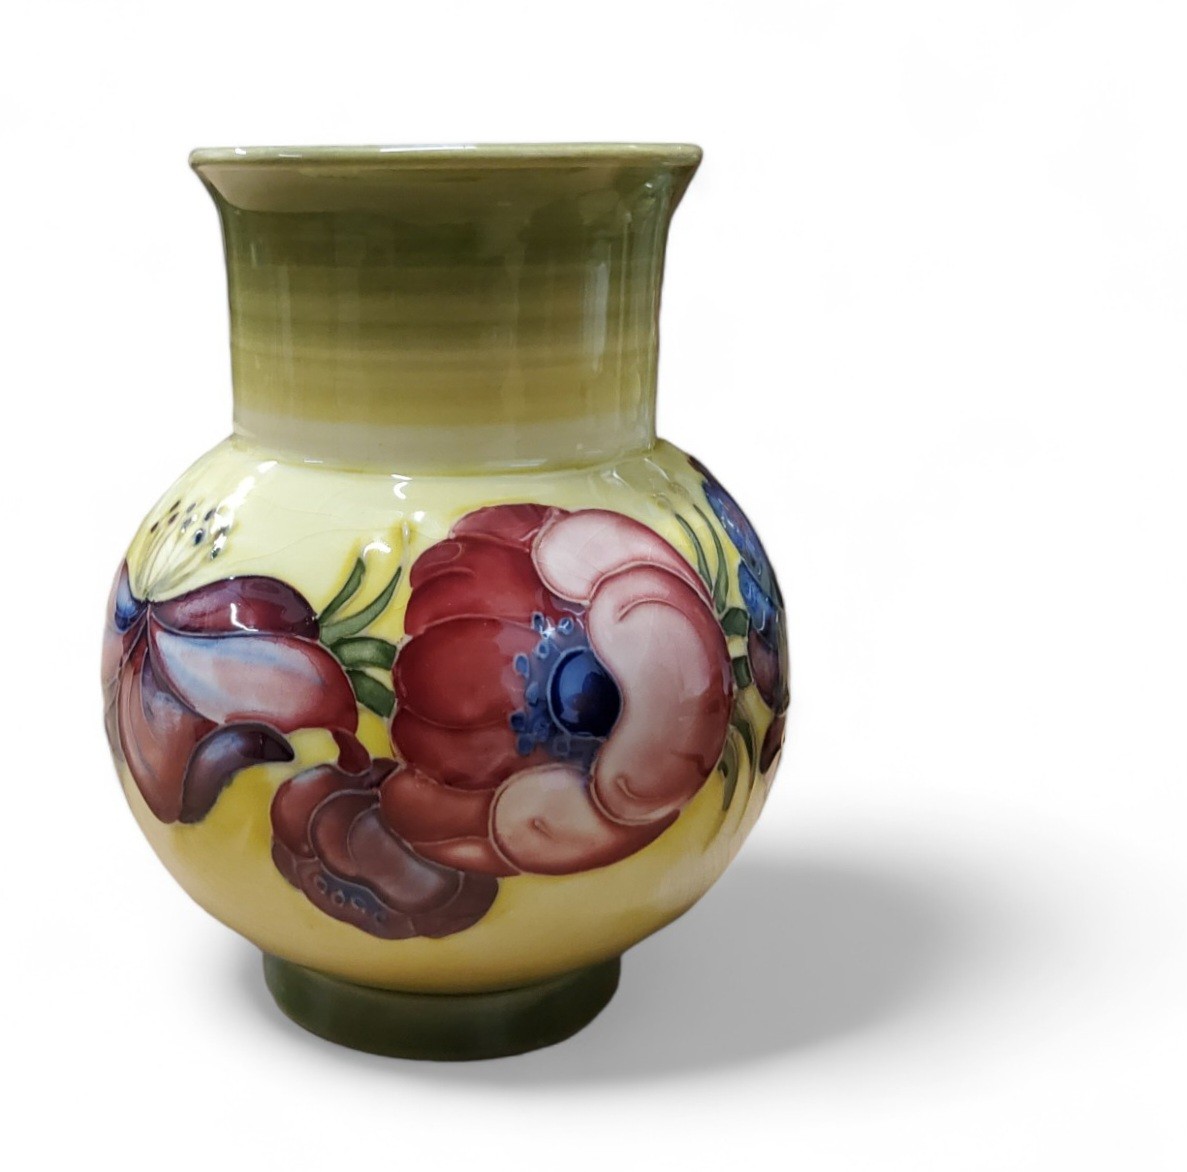 A Moorcroft  Anemone vase, tube lined with large flowerheads on a on mottled yellow and green